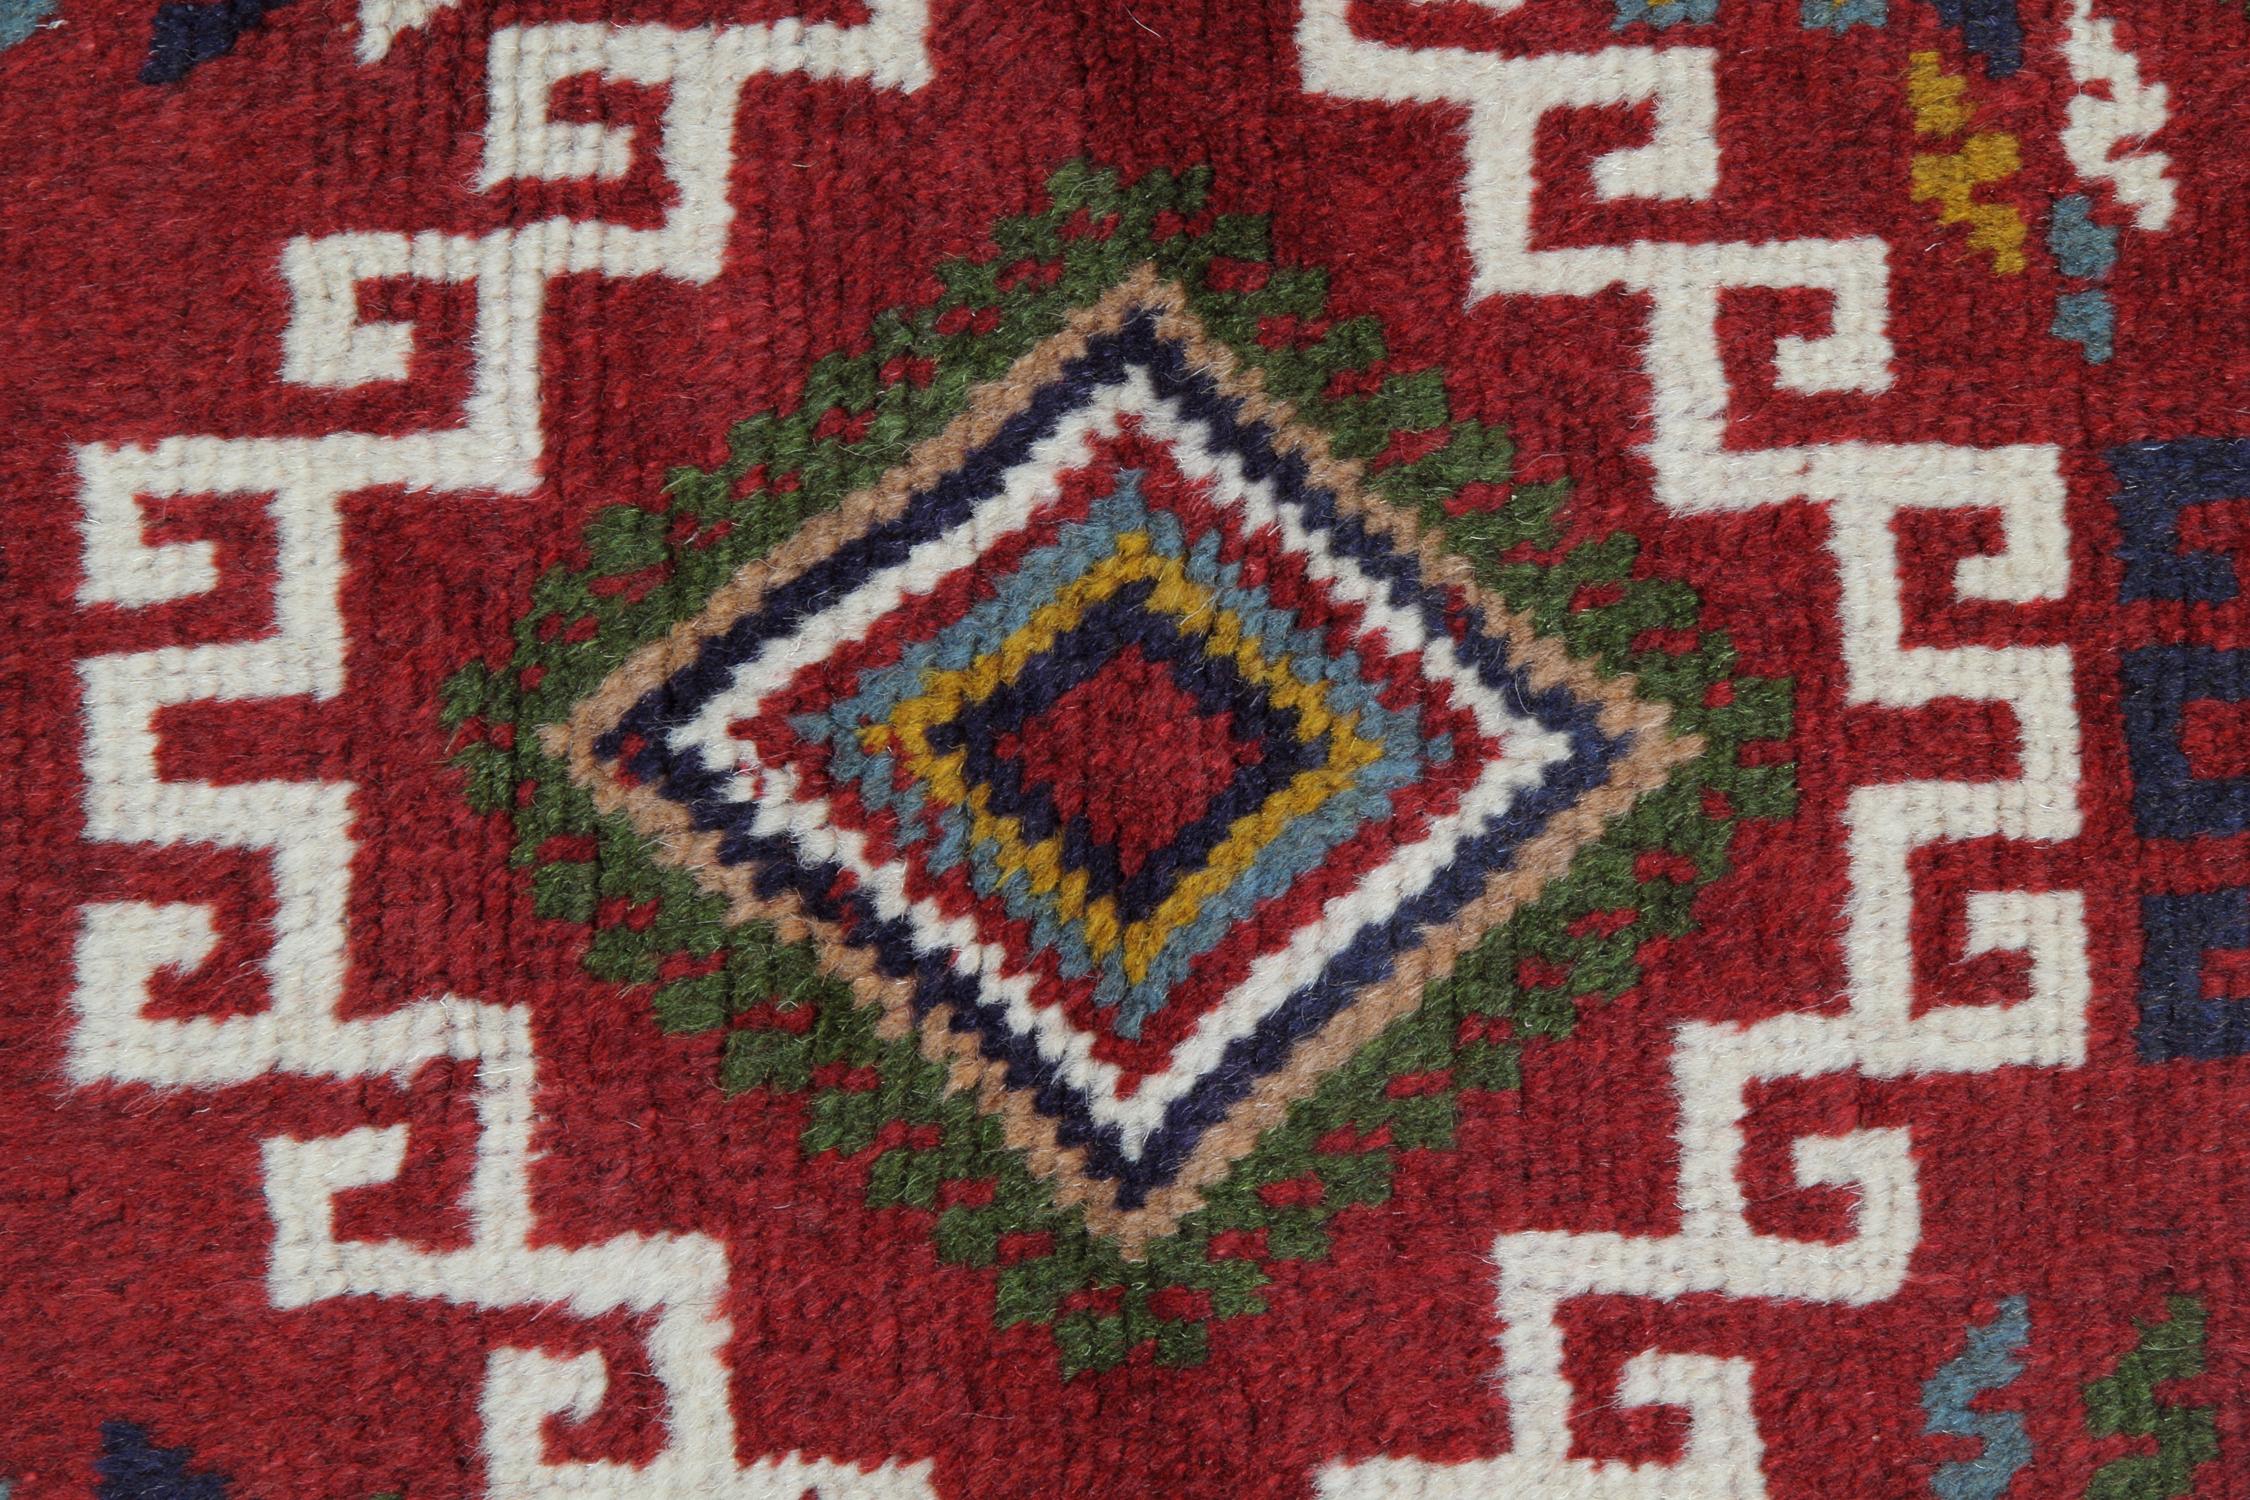 This handmade carpet impressive antique red rug is made from our master weavers in Caucasia. These particular carpet runners are made with all-natural vegetable dyes. The patterned rugs display an all-over geometrical rug pattern. This woven rug